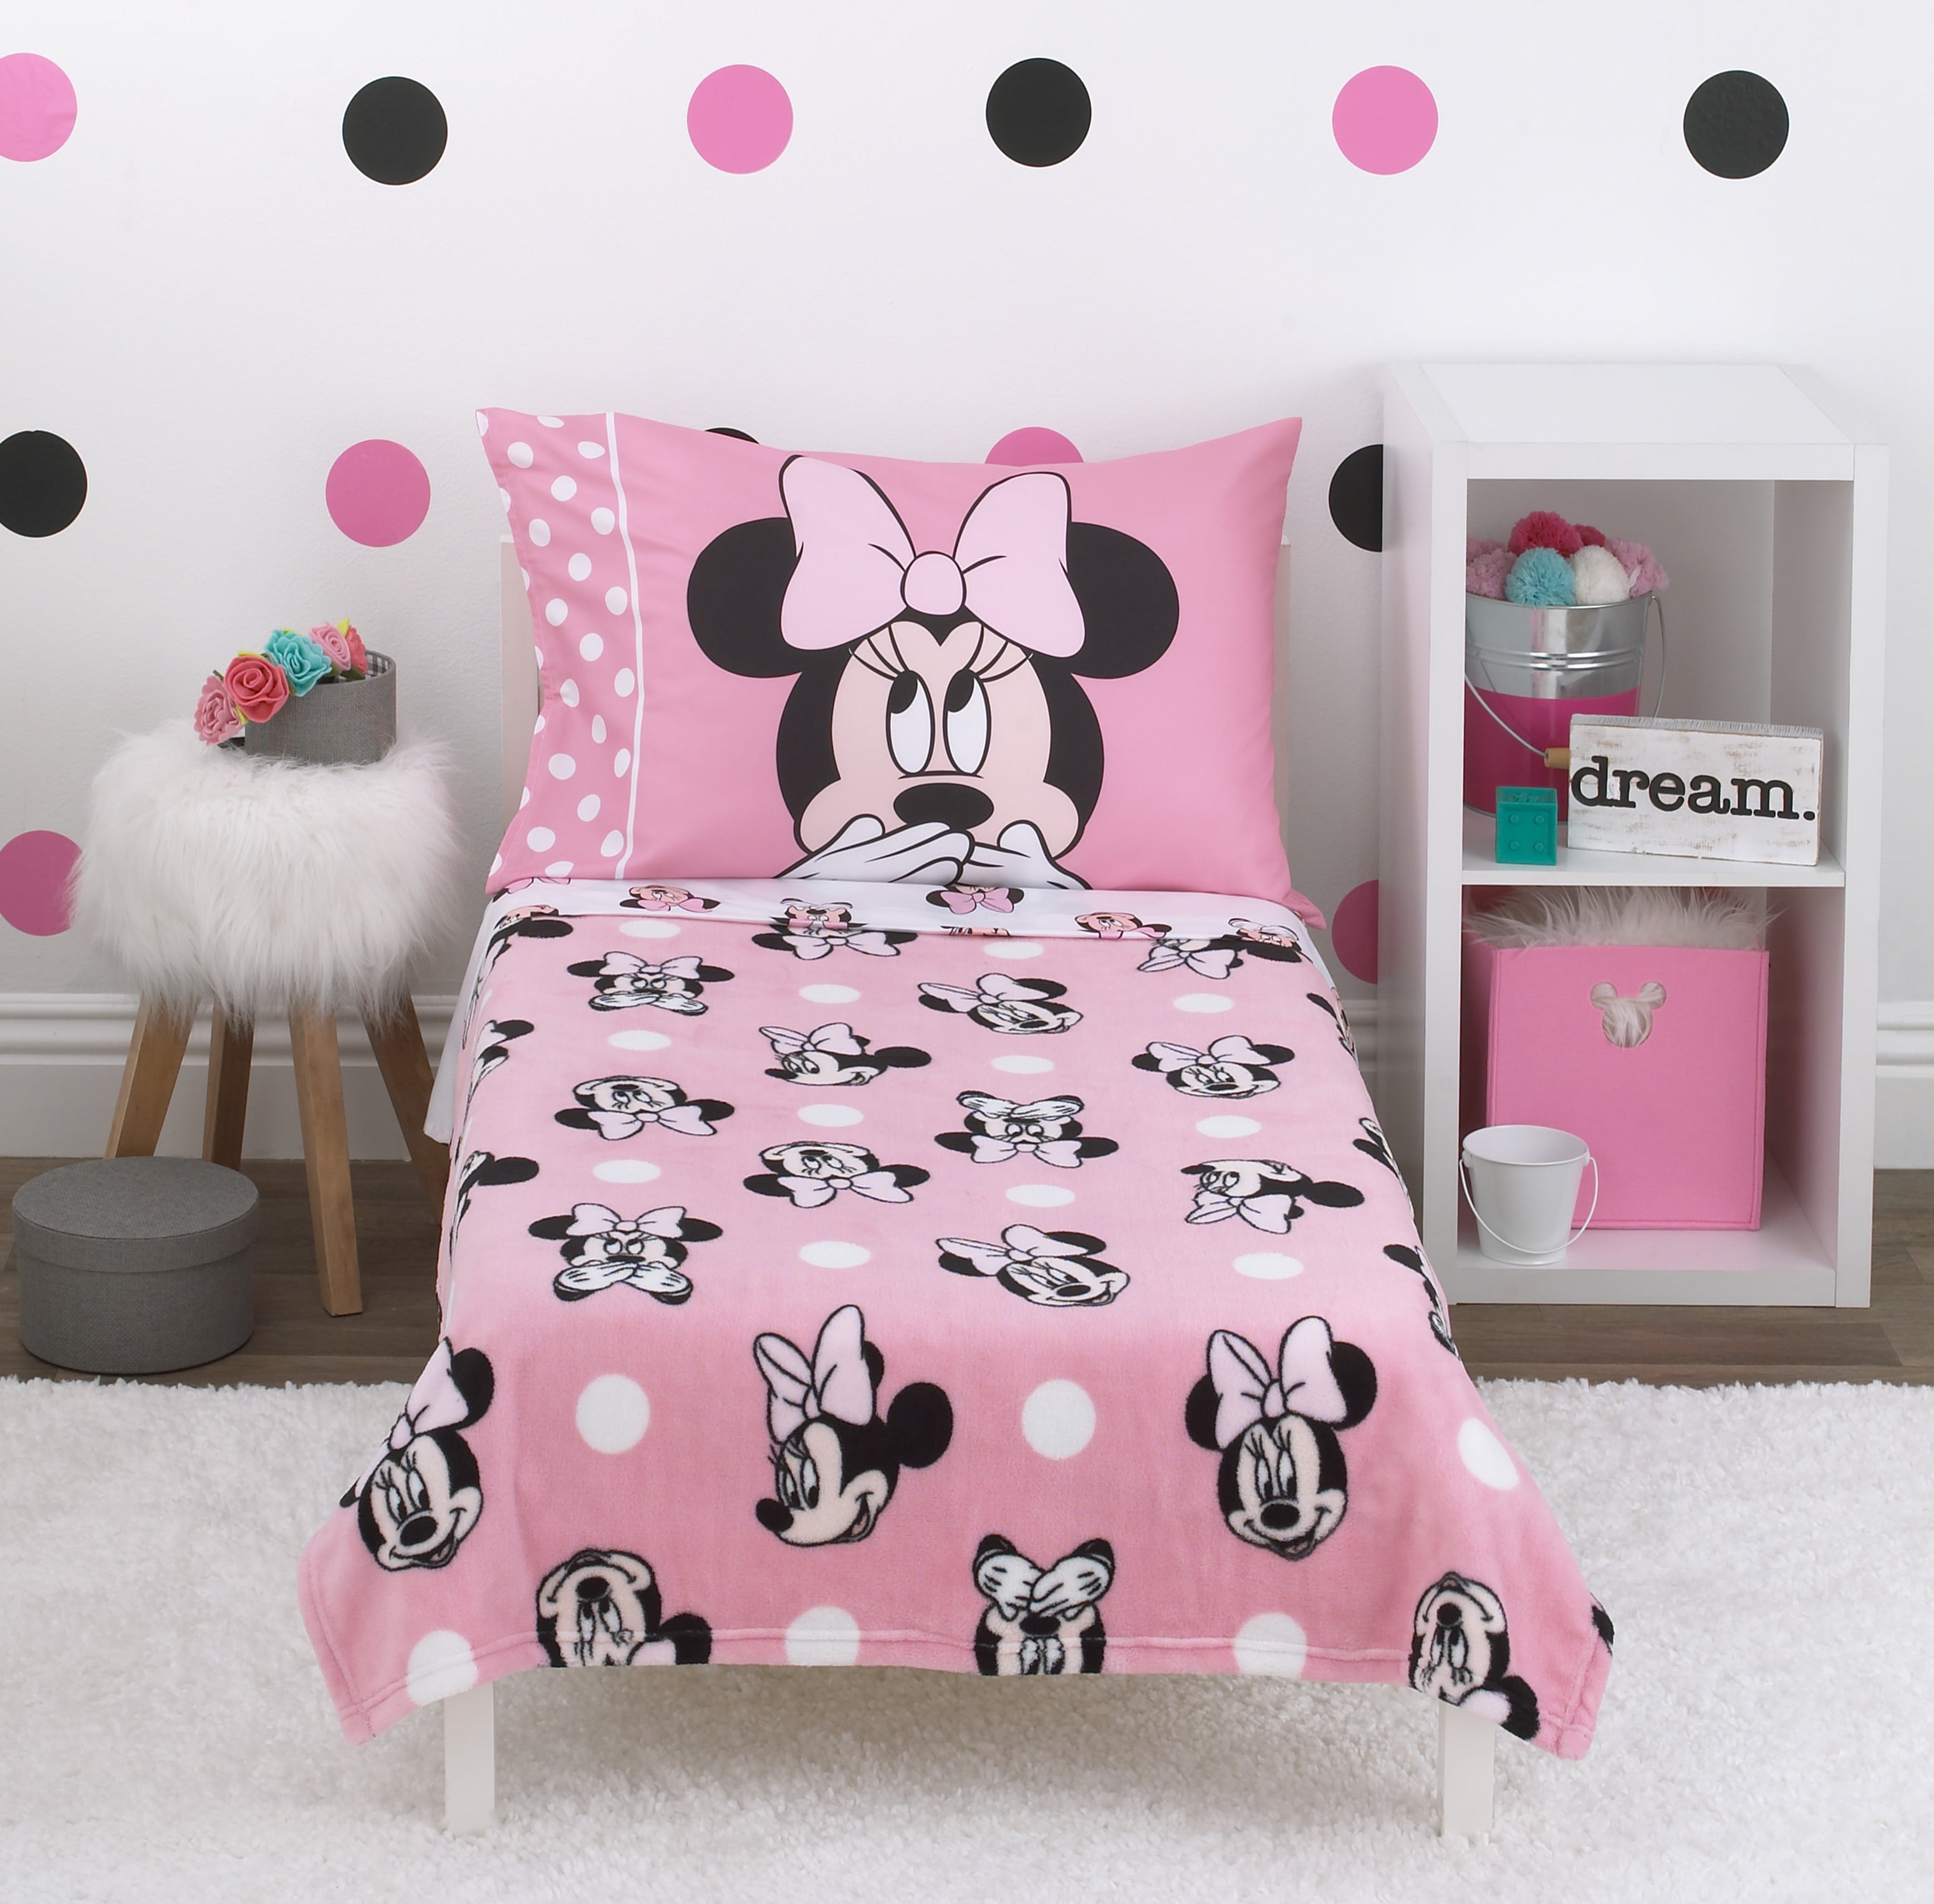 Minnie Mouse crib toddler bed fitted sheet top sheet blanket pillow curtain FREE 